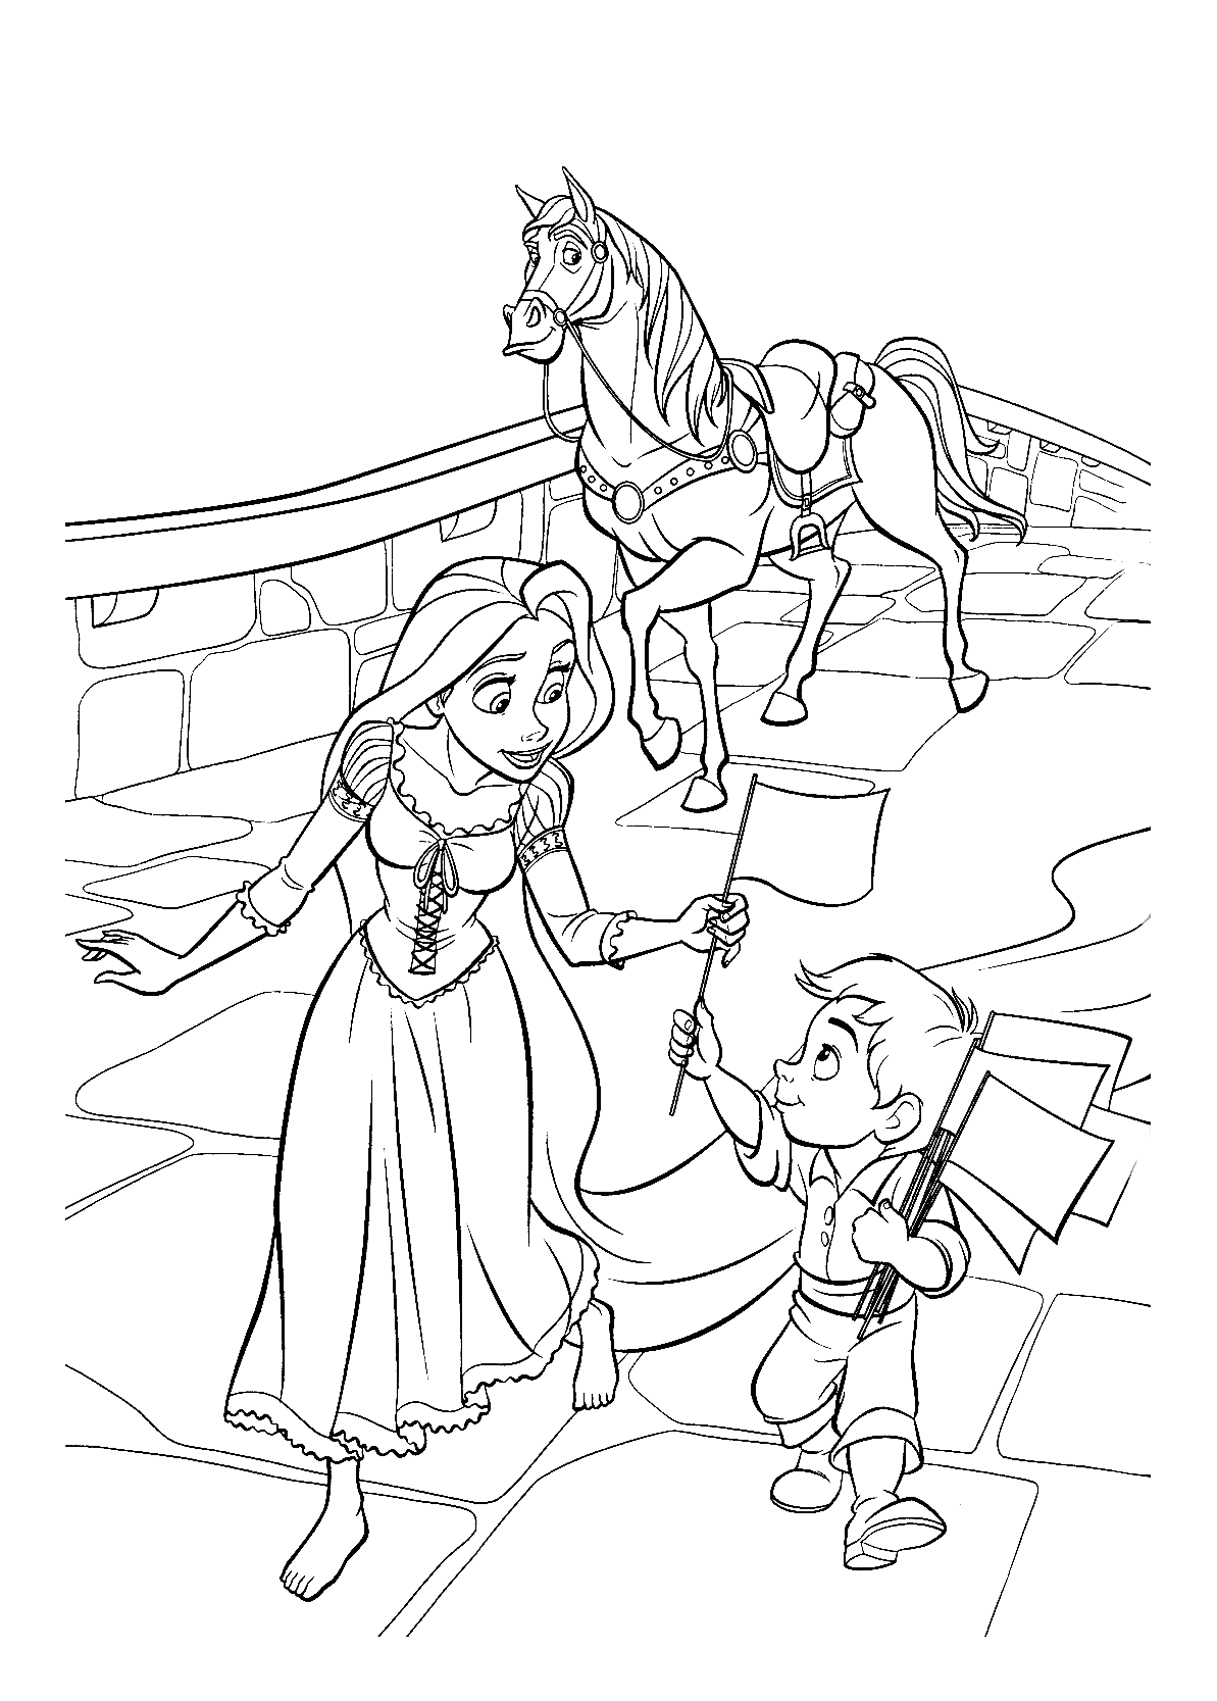 Complex & Funny Tangled coloring page for kids